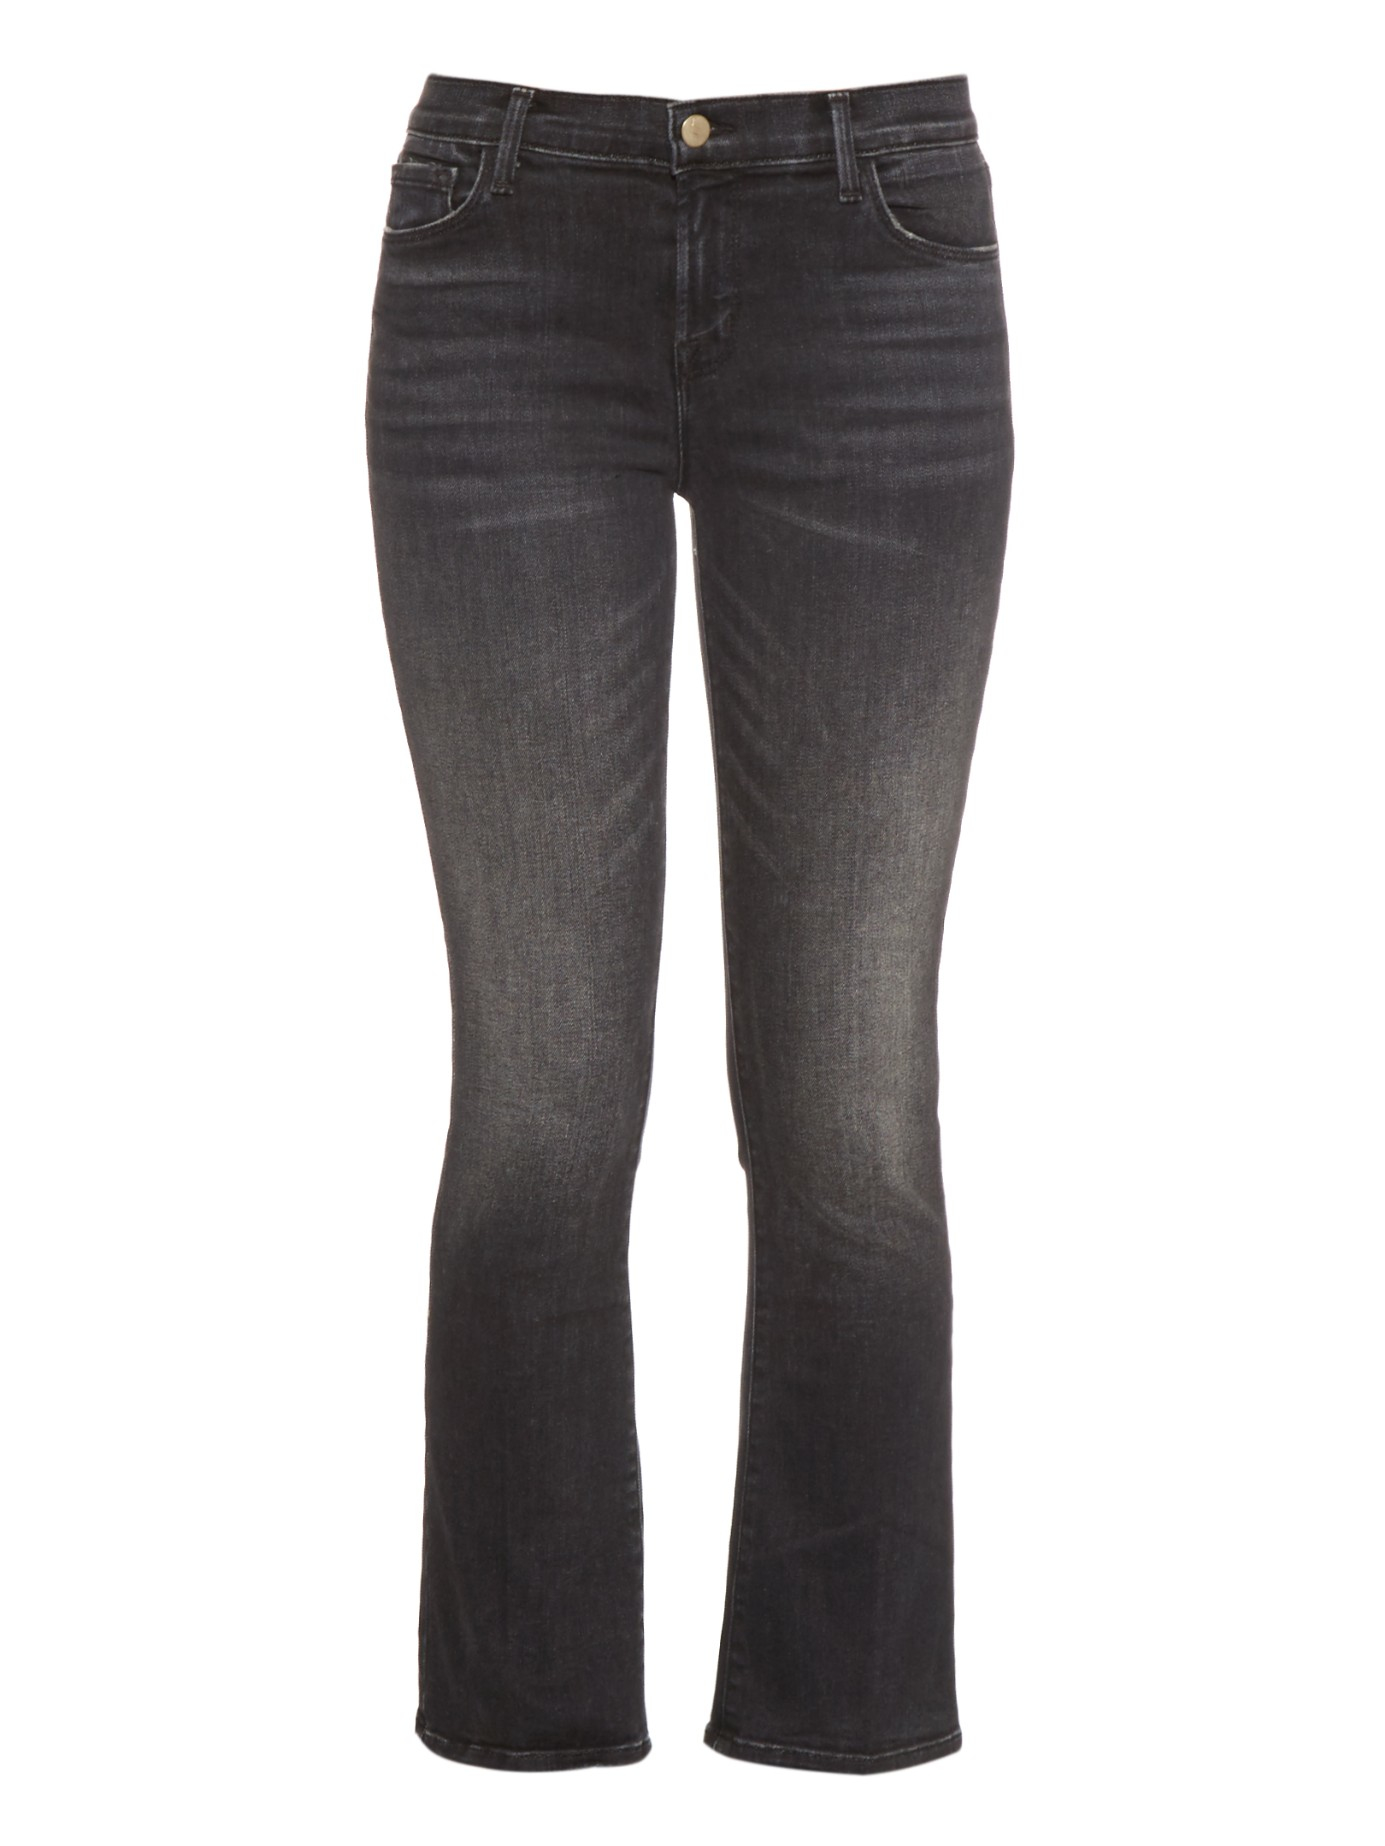 womens gray bootcut jeans